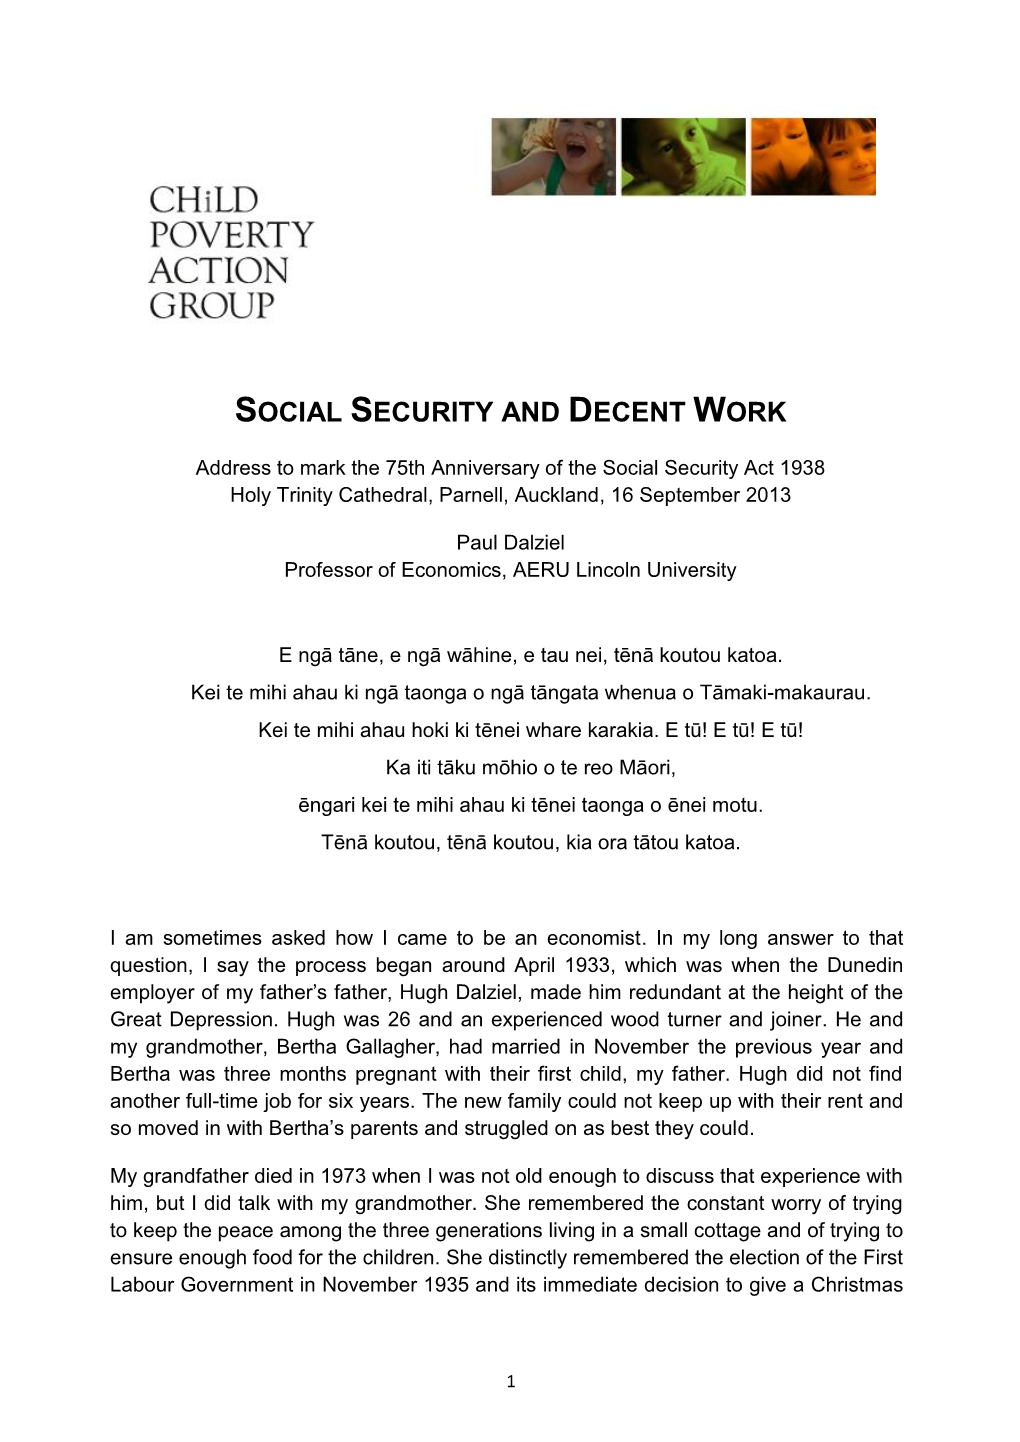 Social Security and Decent Work